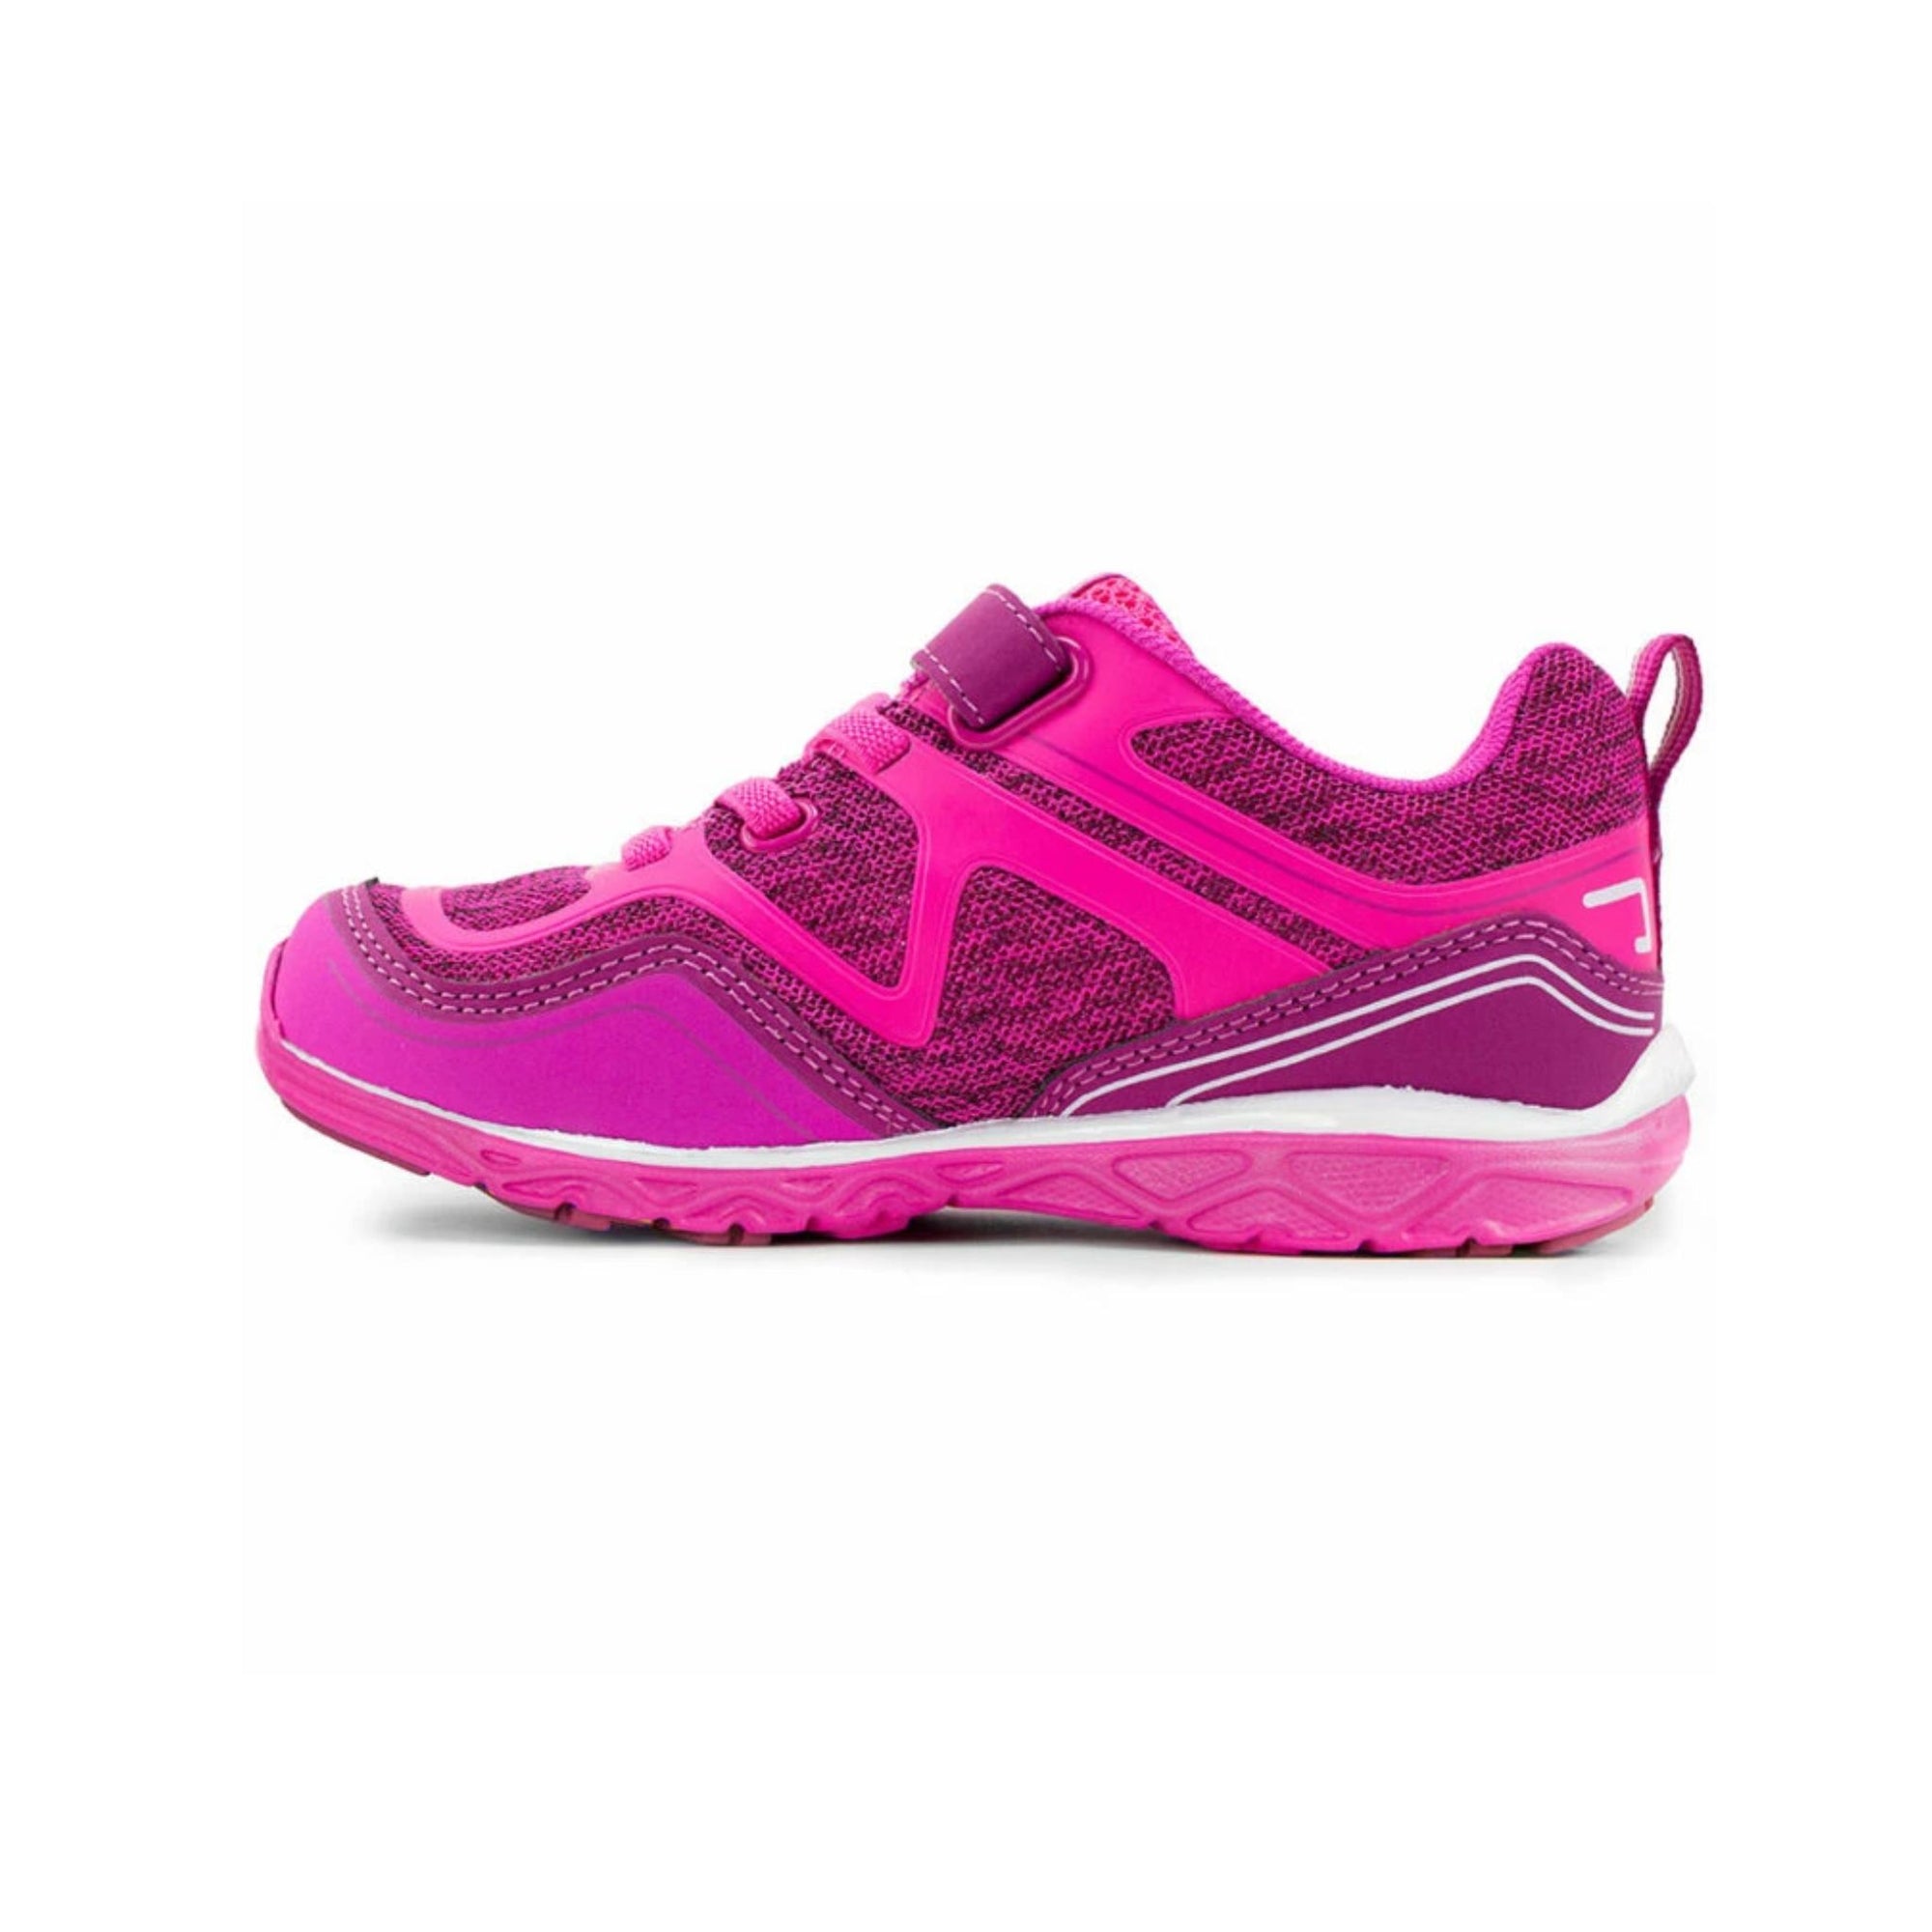 Pediped Flex Force Hot Pink Athletic Shoes